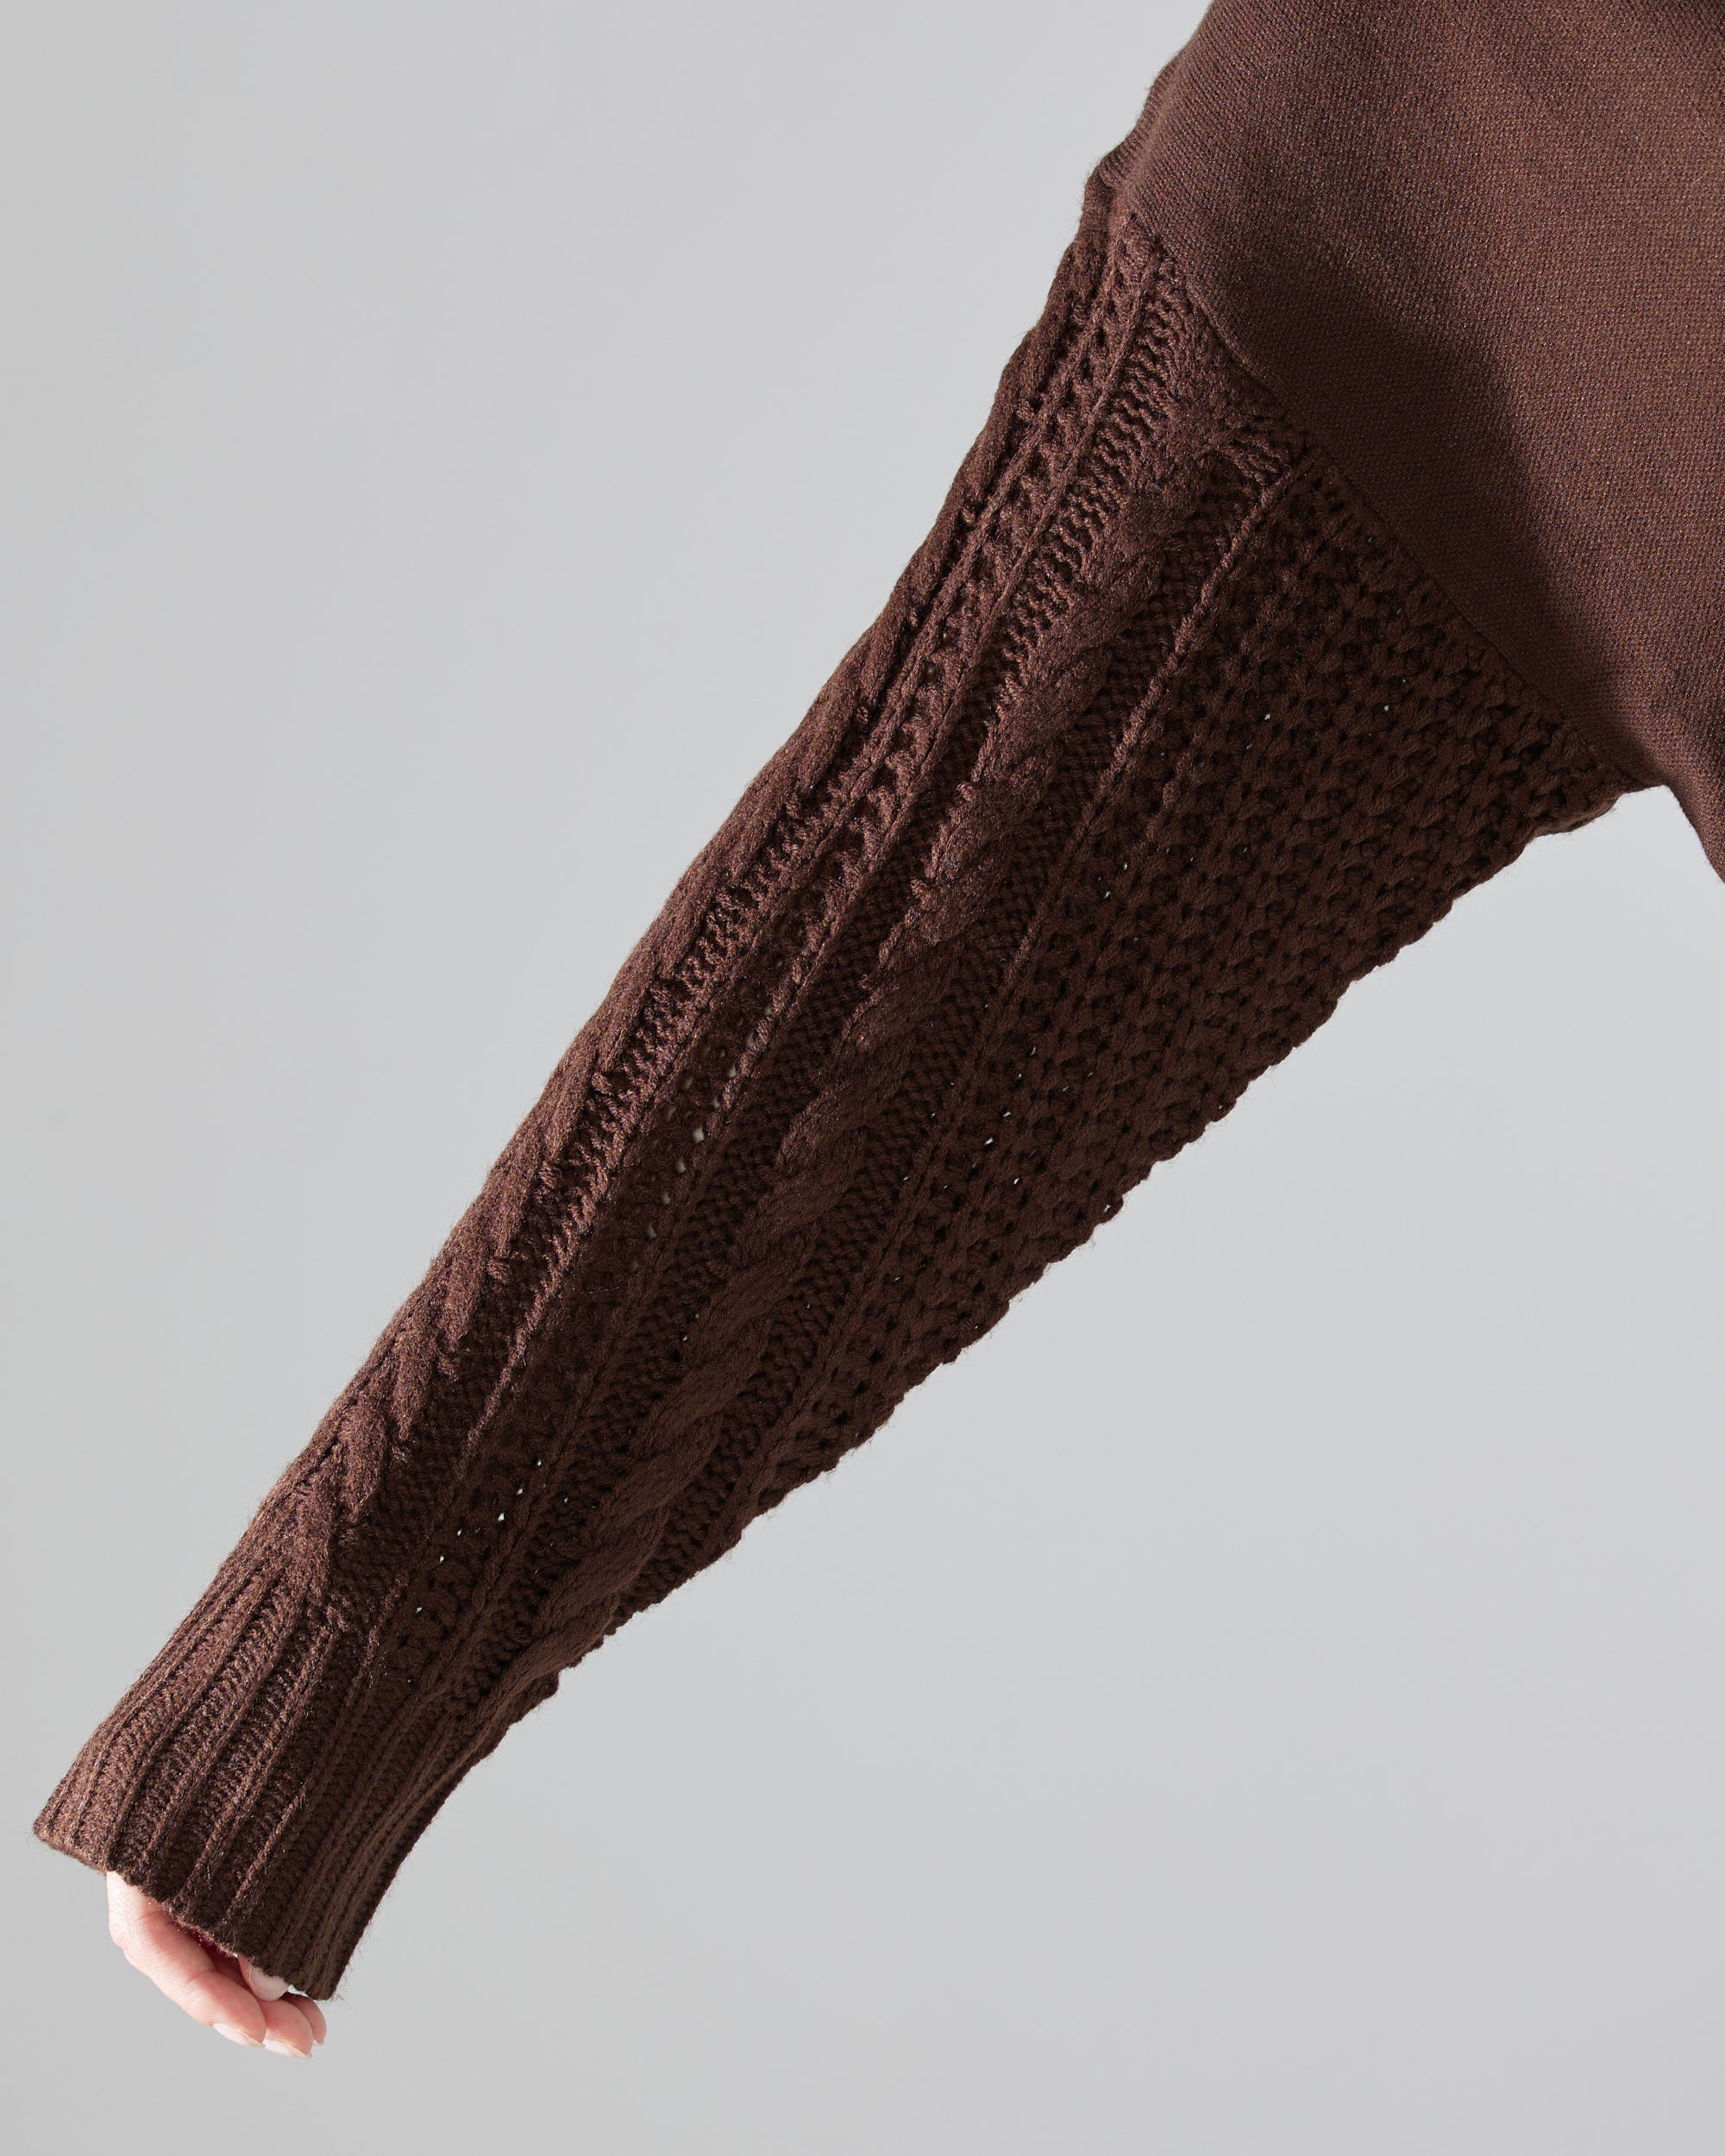 Marsala Cable Knit Sweater Online